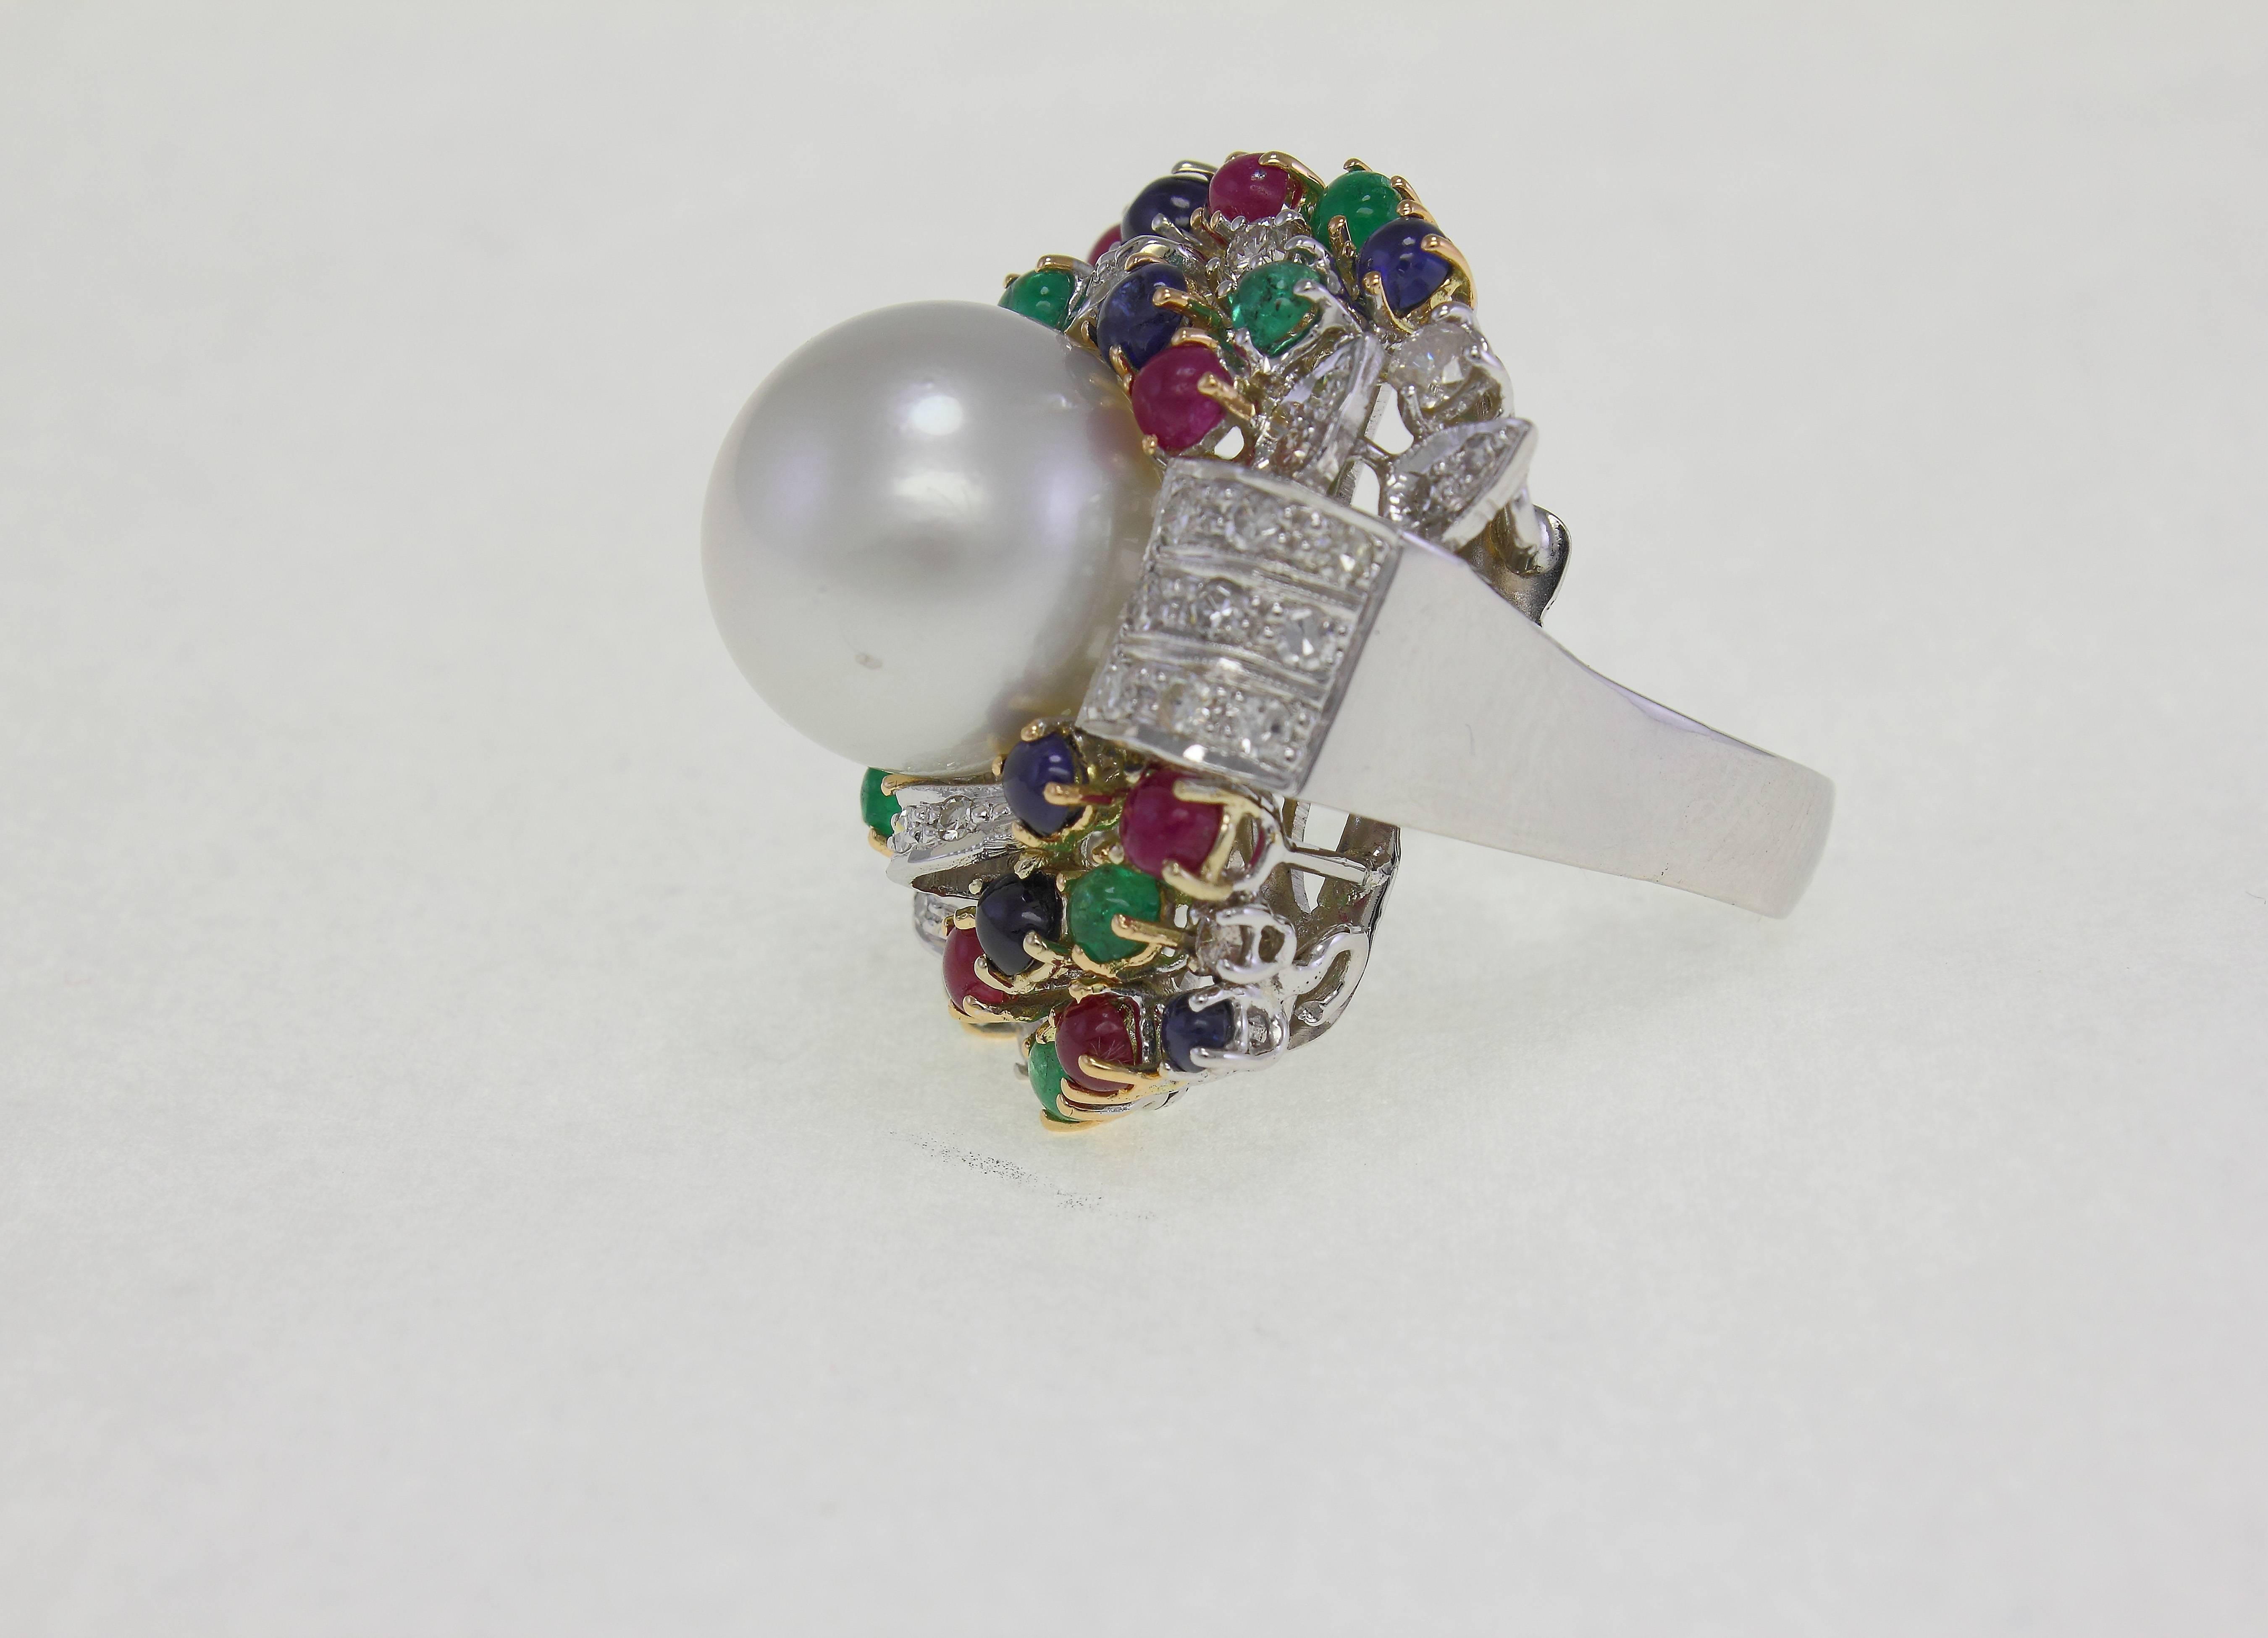 14 carat white gold ring in US size 8.5 / EU size 17, with a pearl of 15mm diameter / 0.59 inch, surrounded by diamonds (1.39 carat), sapphires, rubies & emeralds (5.82 carat).